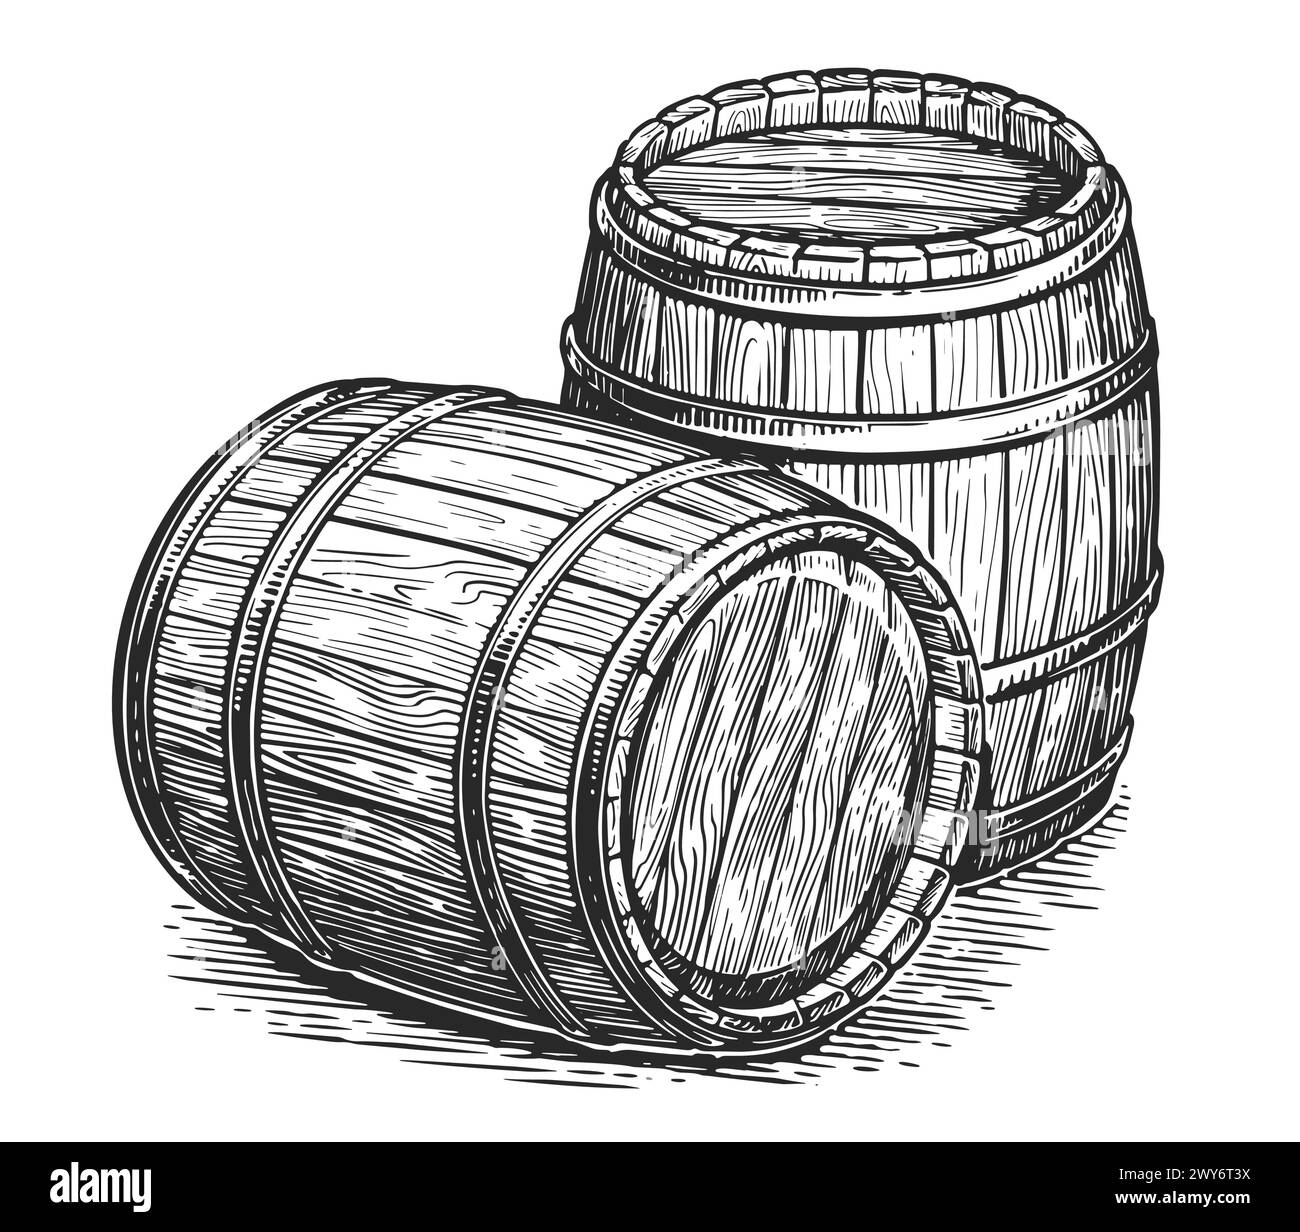 Wood barrels for alcoholic beverages. Oak kegs with wine or beer. Hand drawn engraving style illustration Stock Vector